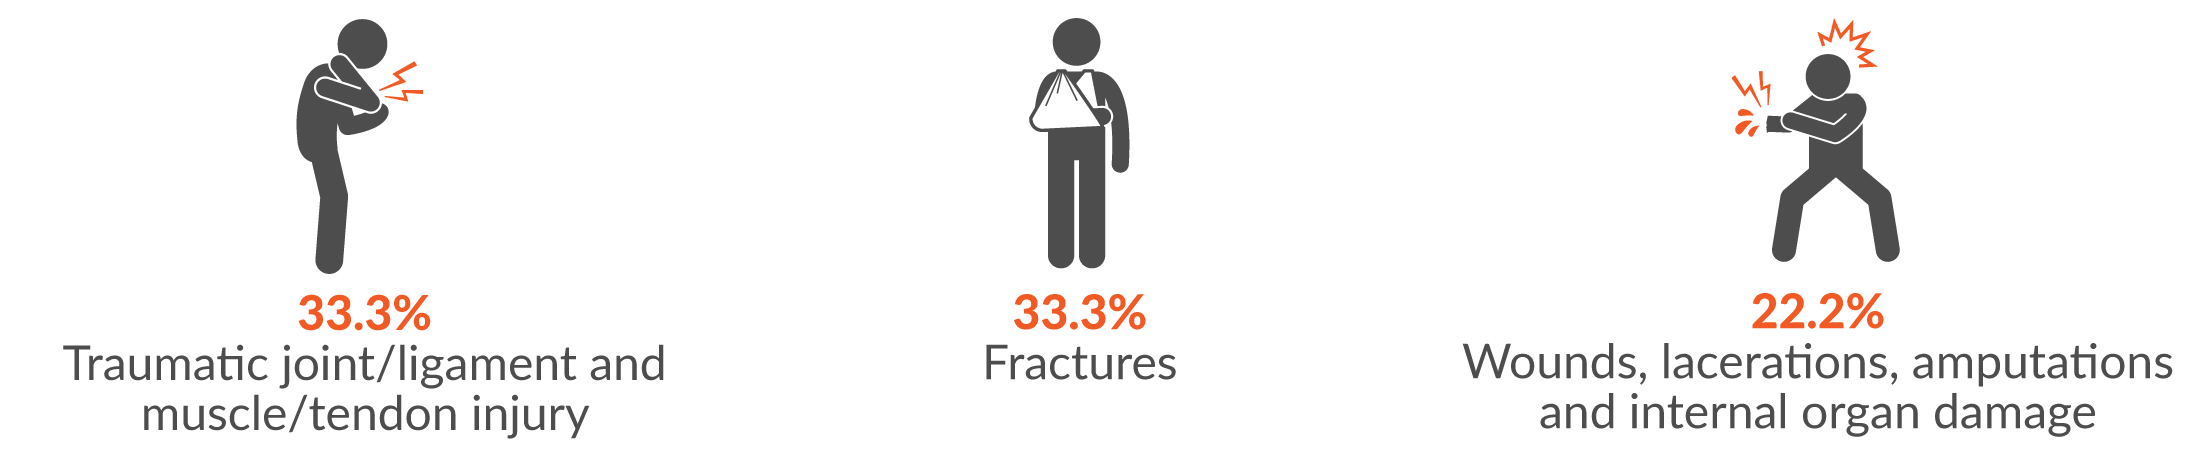 33.3% traumatic joint/ligament and muscle/tendon injury; 33.3% fractures and 22.2% wounds, lacerations, amputations and internal organ damage.